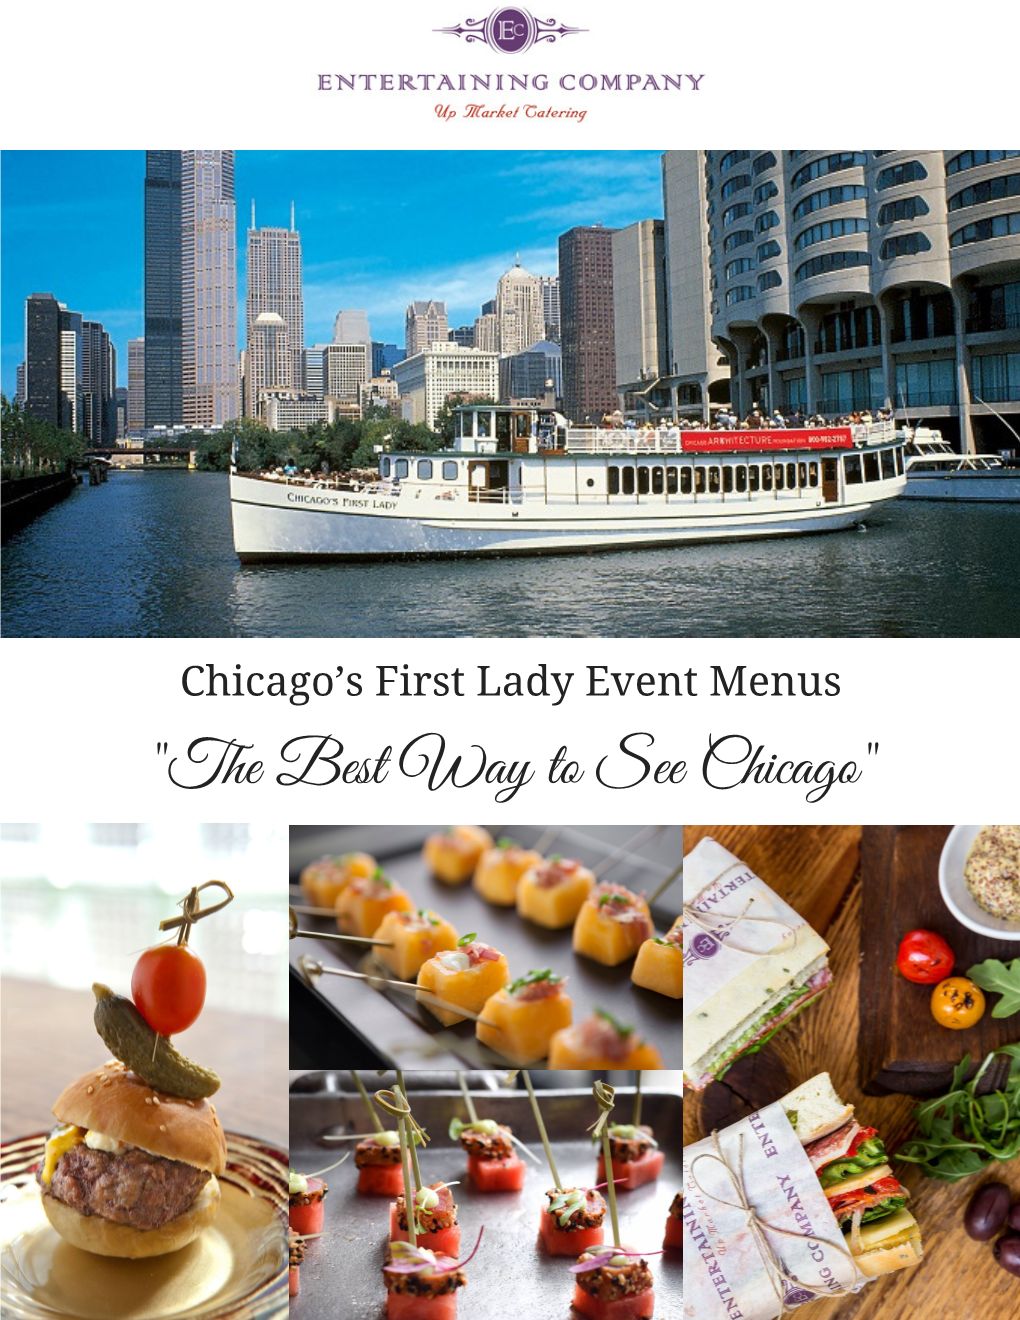 "The Best Way to See Chicago" Summe Cocktail Buffet 2017 Timing Restrictions May Apply